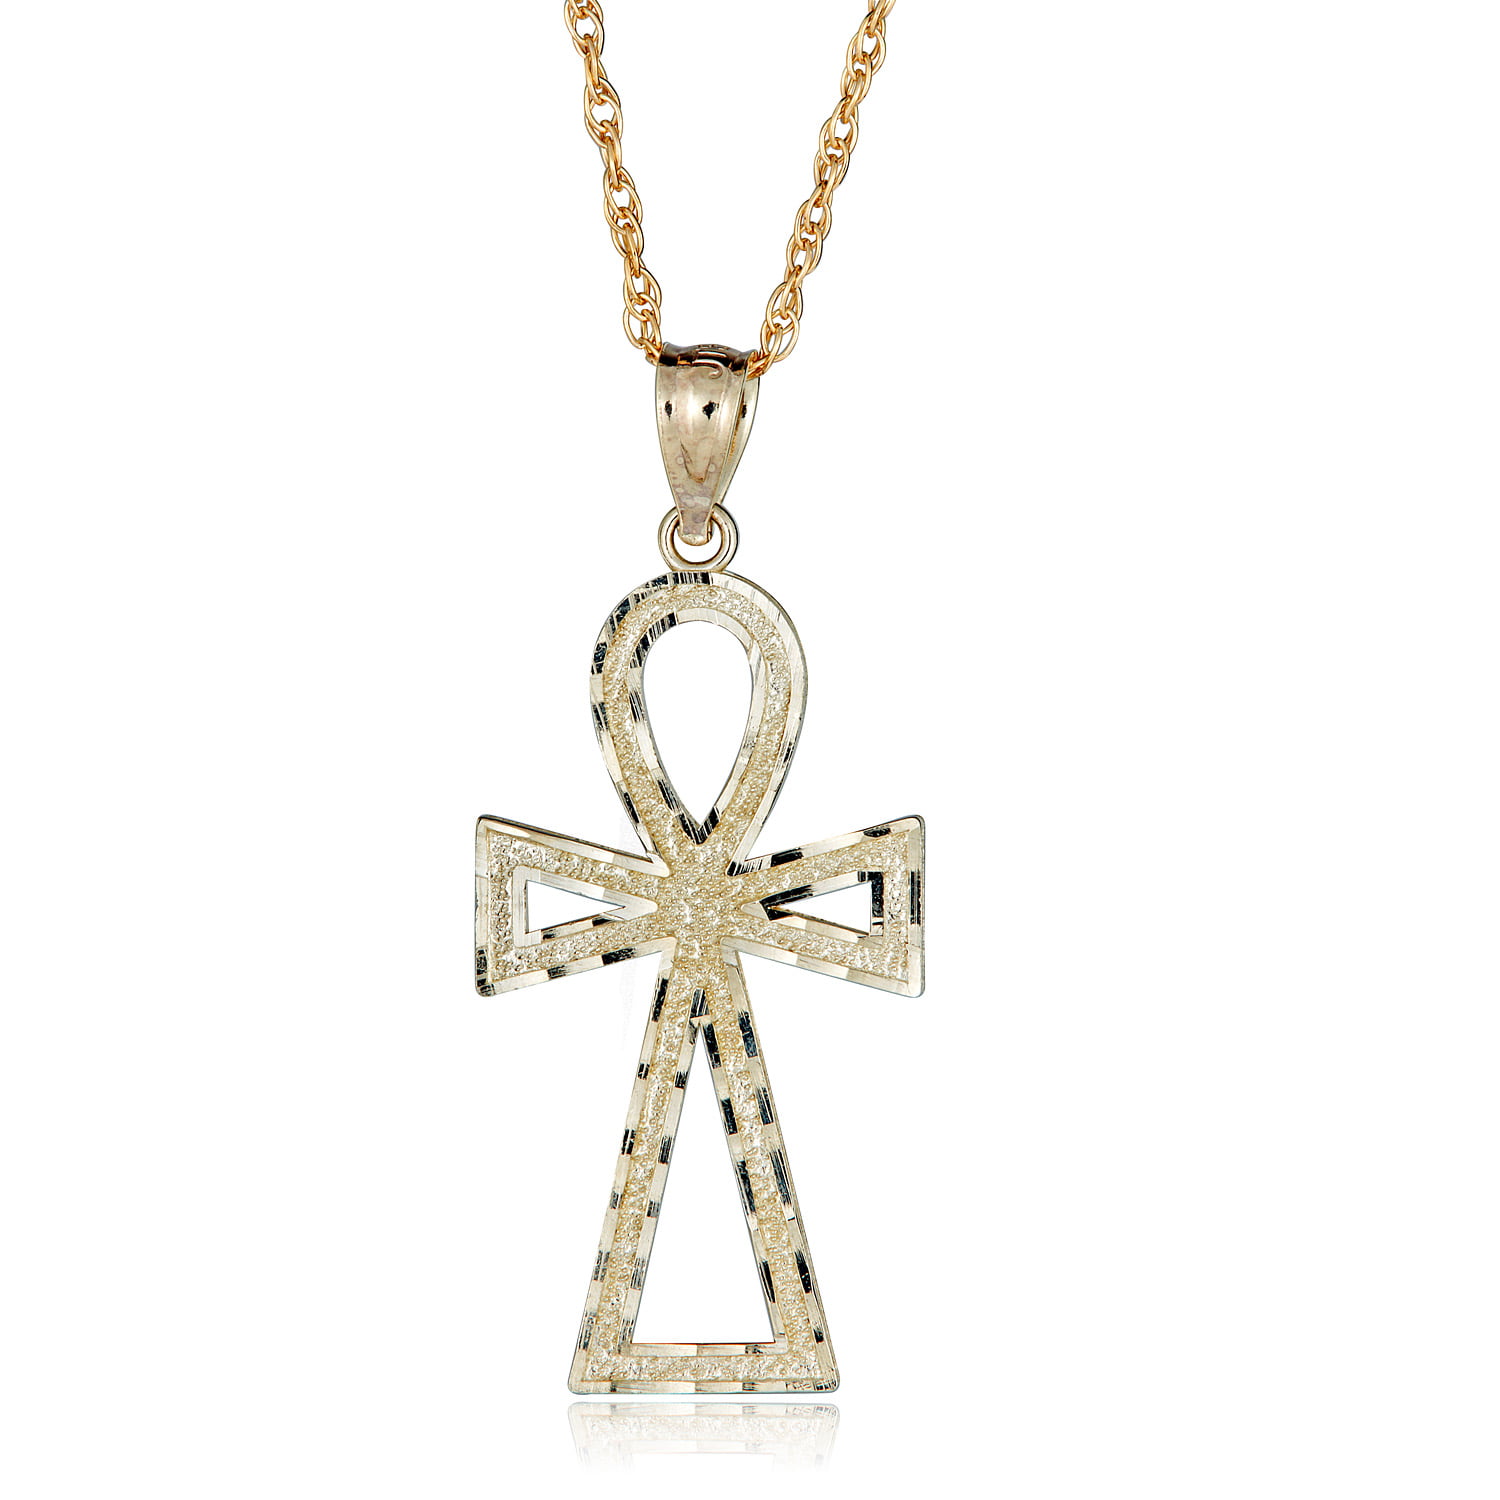 Retro Ankh Key Of Life Necklaces Jewelry Cross Religious Pendant Necklace Rope Chain Jewelry Egyptian Mens Choker Length 45Cm